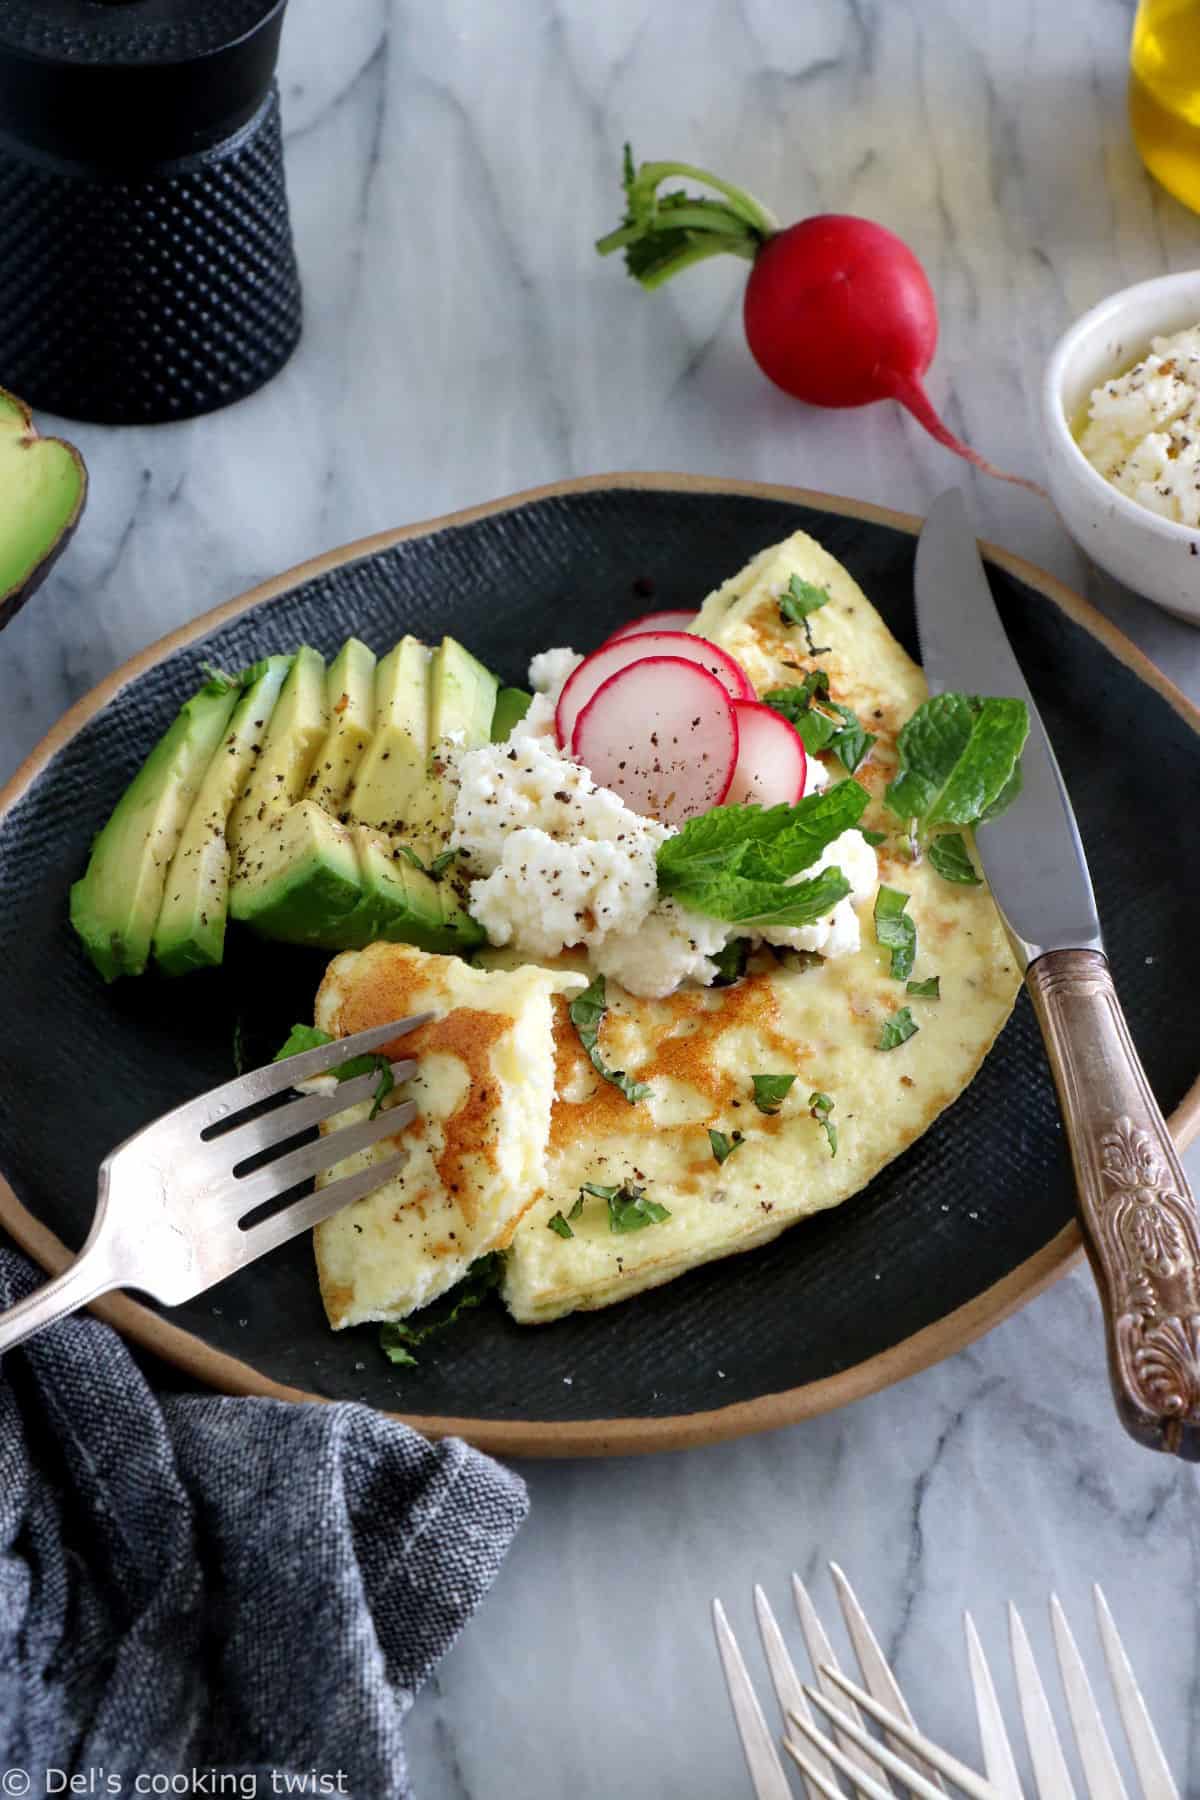 This simple mint ricotta omelet is light, fluffy, and subtly flavored with fresh mint leaves. It doesn't get any more complicated than that.